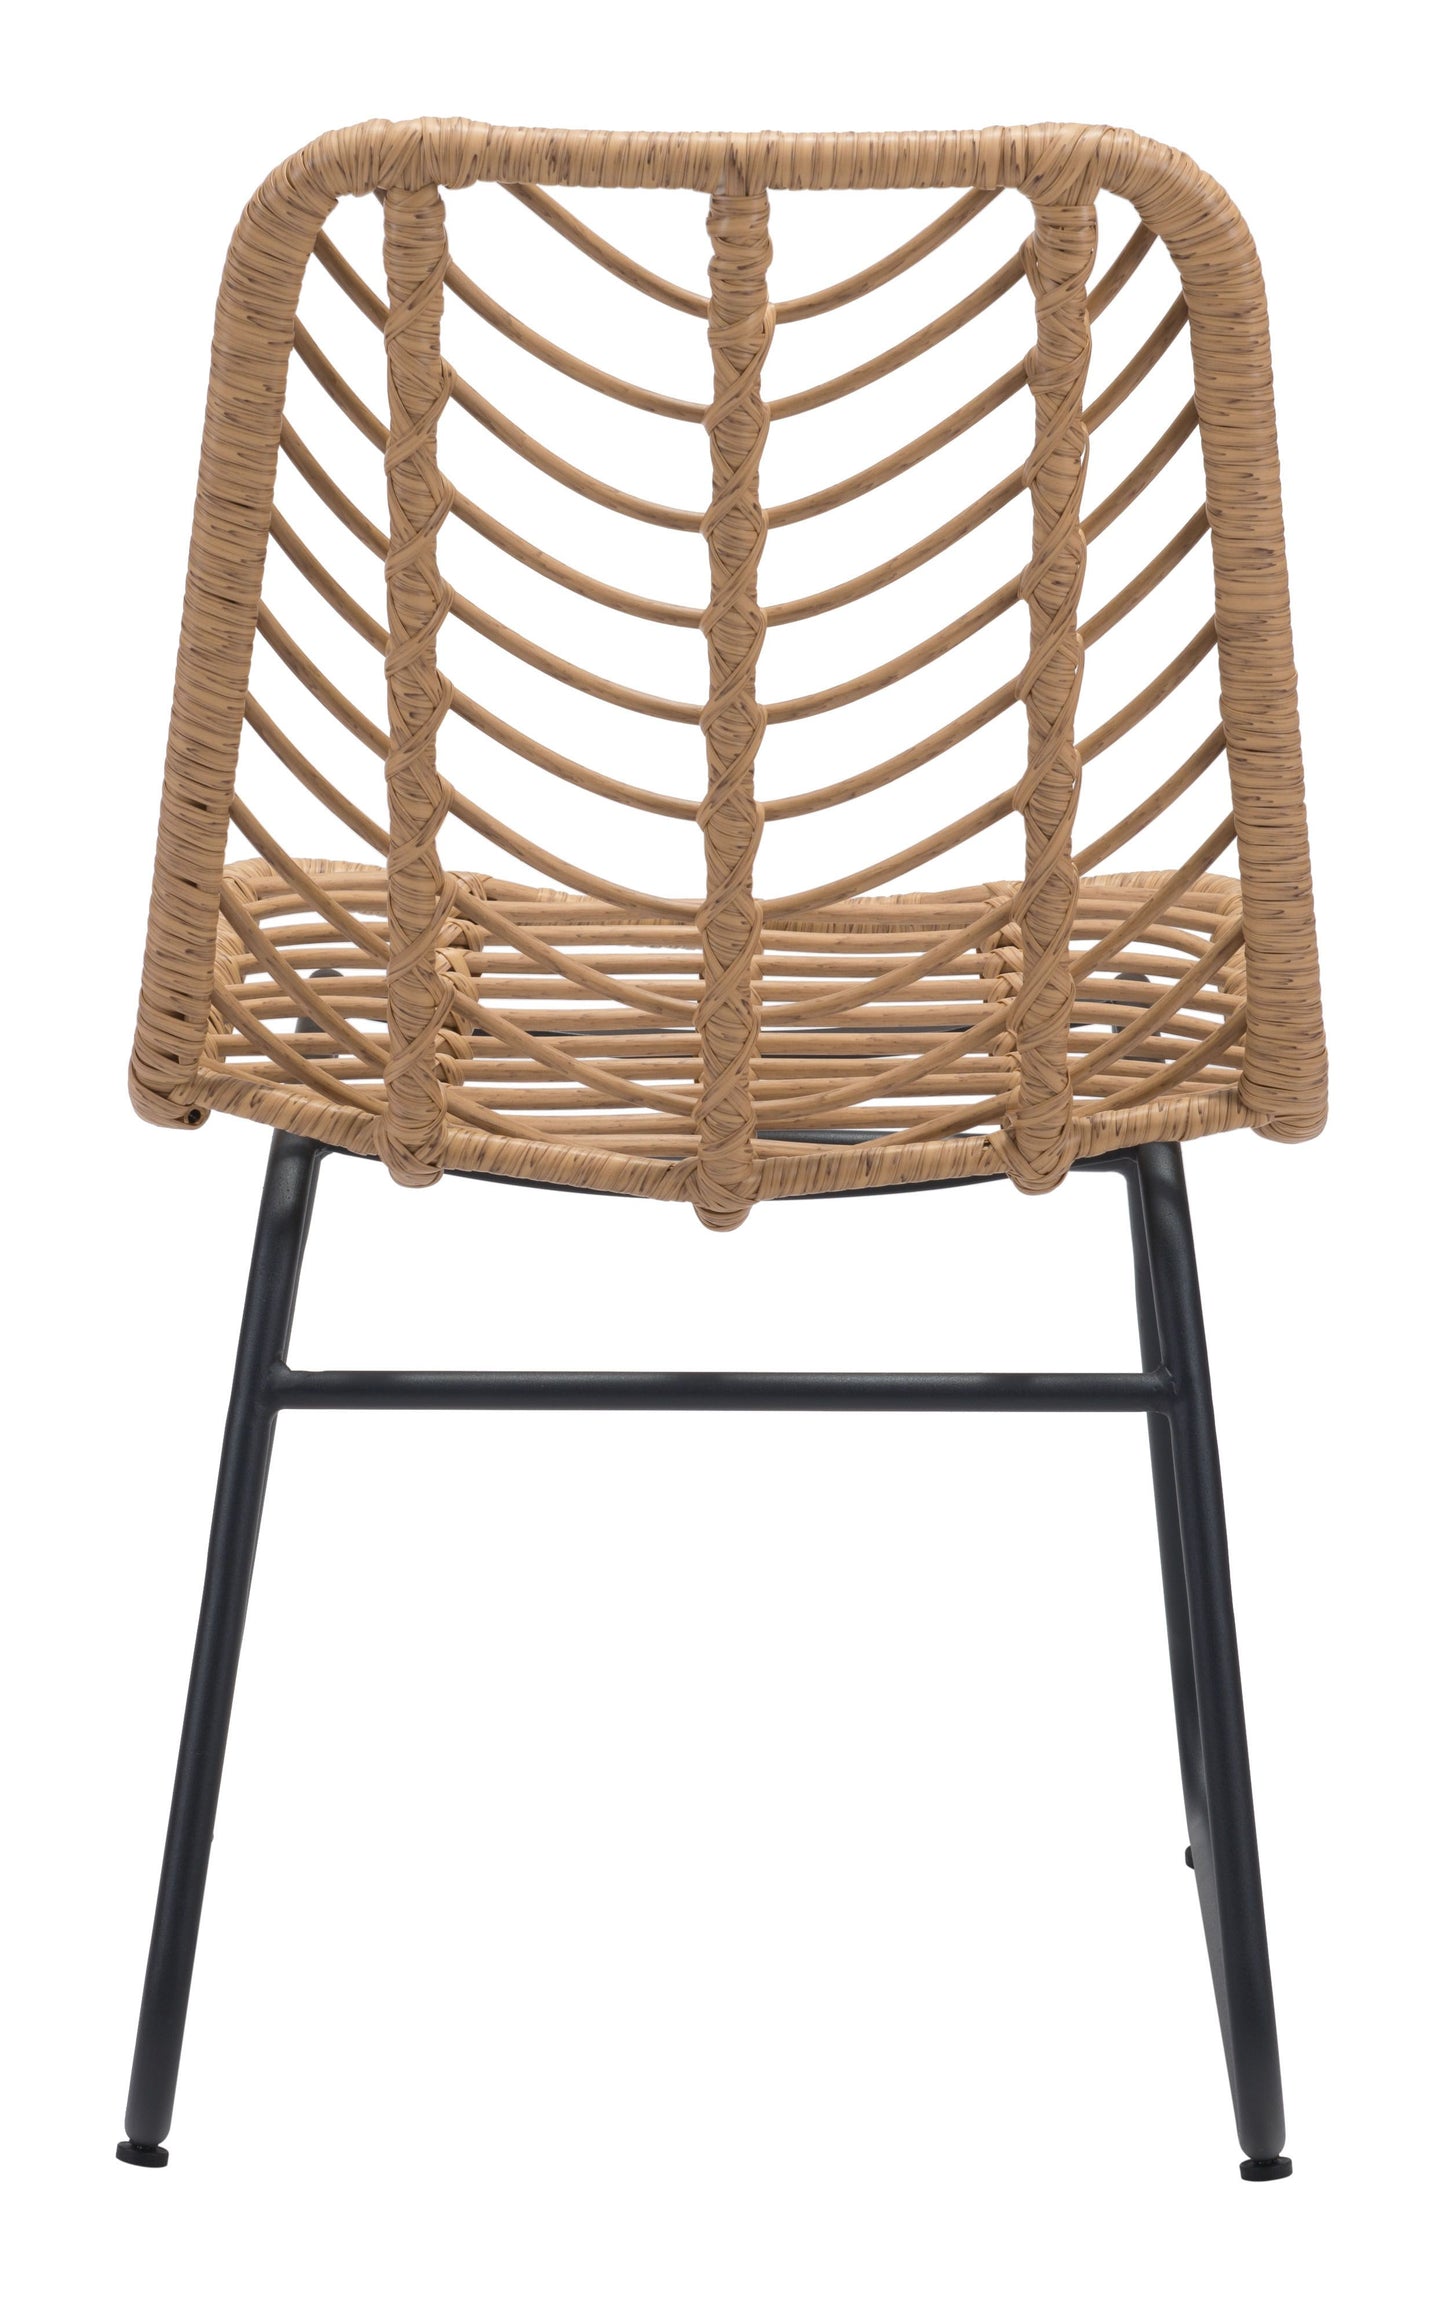 Laporte Dining Chair Natural